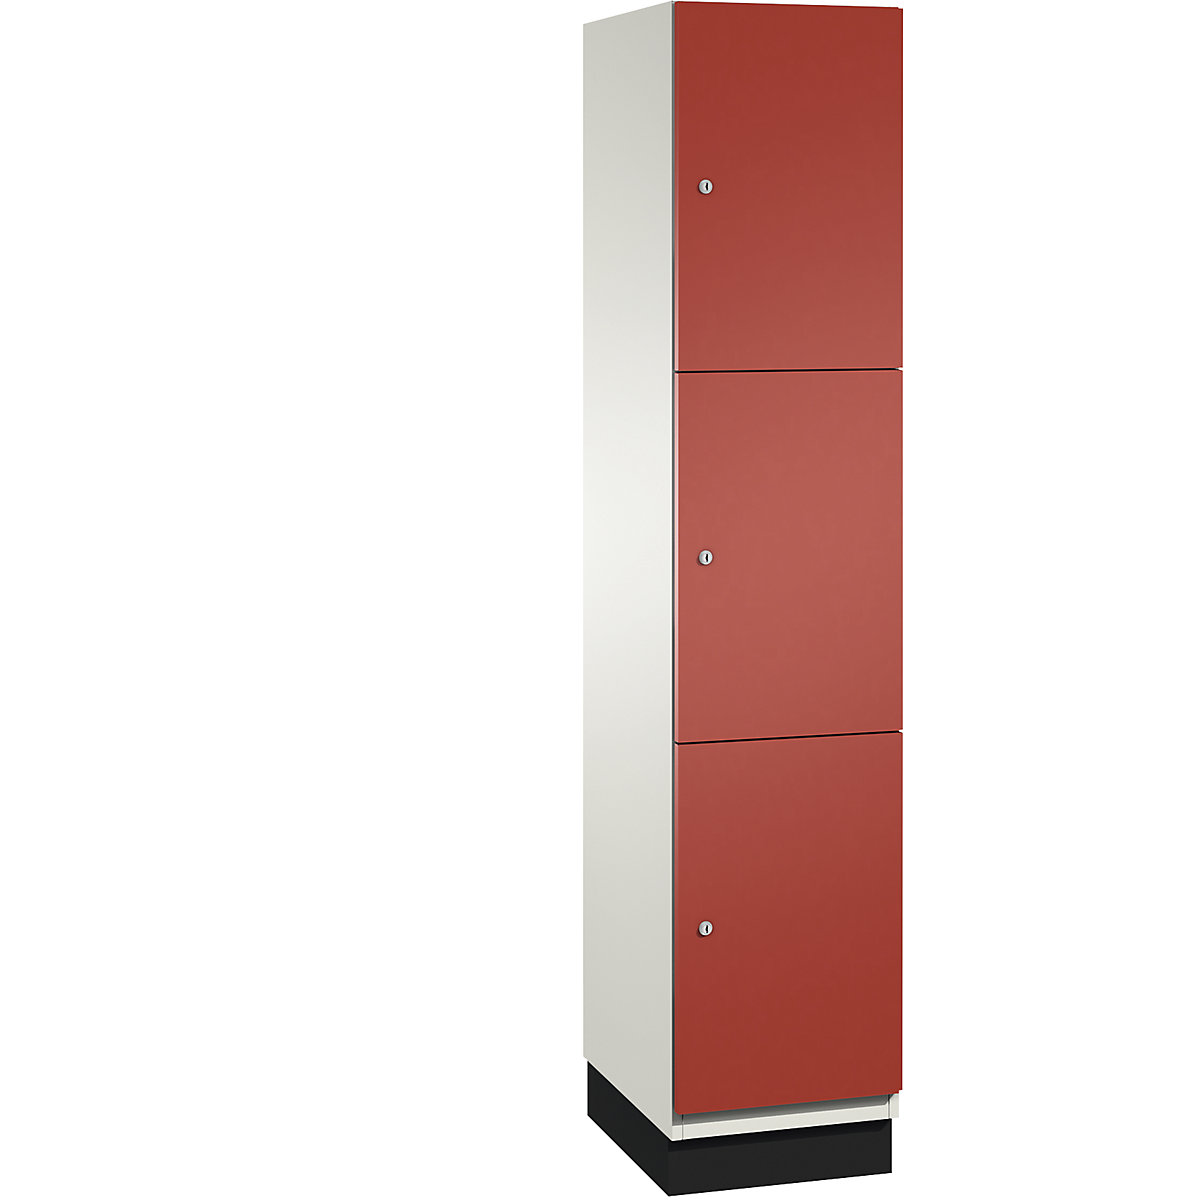 CAMBIO compartment locker with sheet steel doors – C+P, 3 compartments, width 400 mm, body pure white / door flame red-2